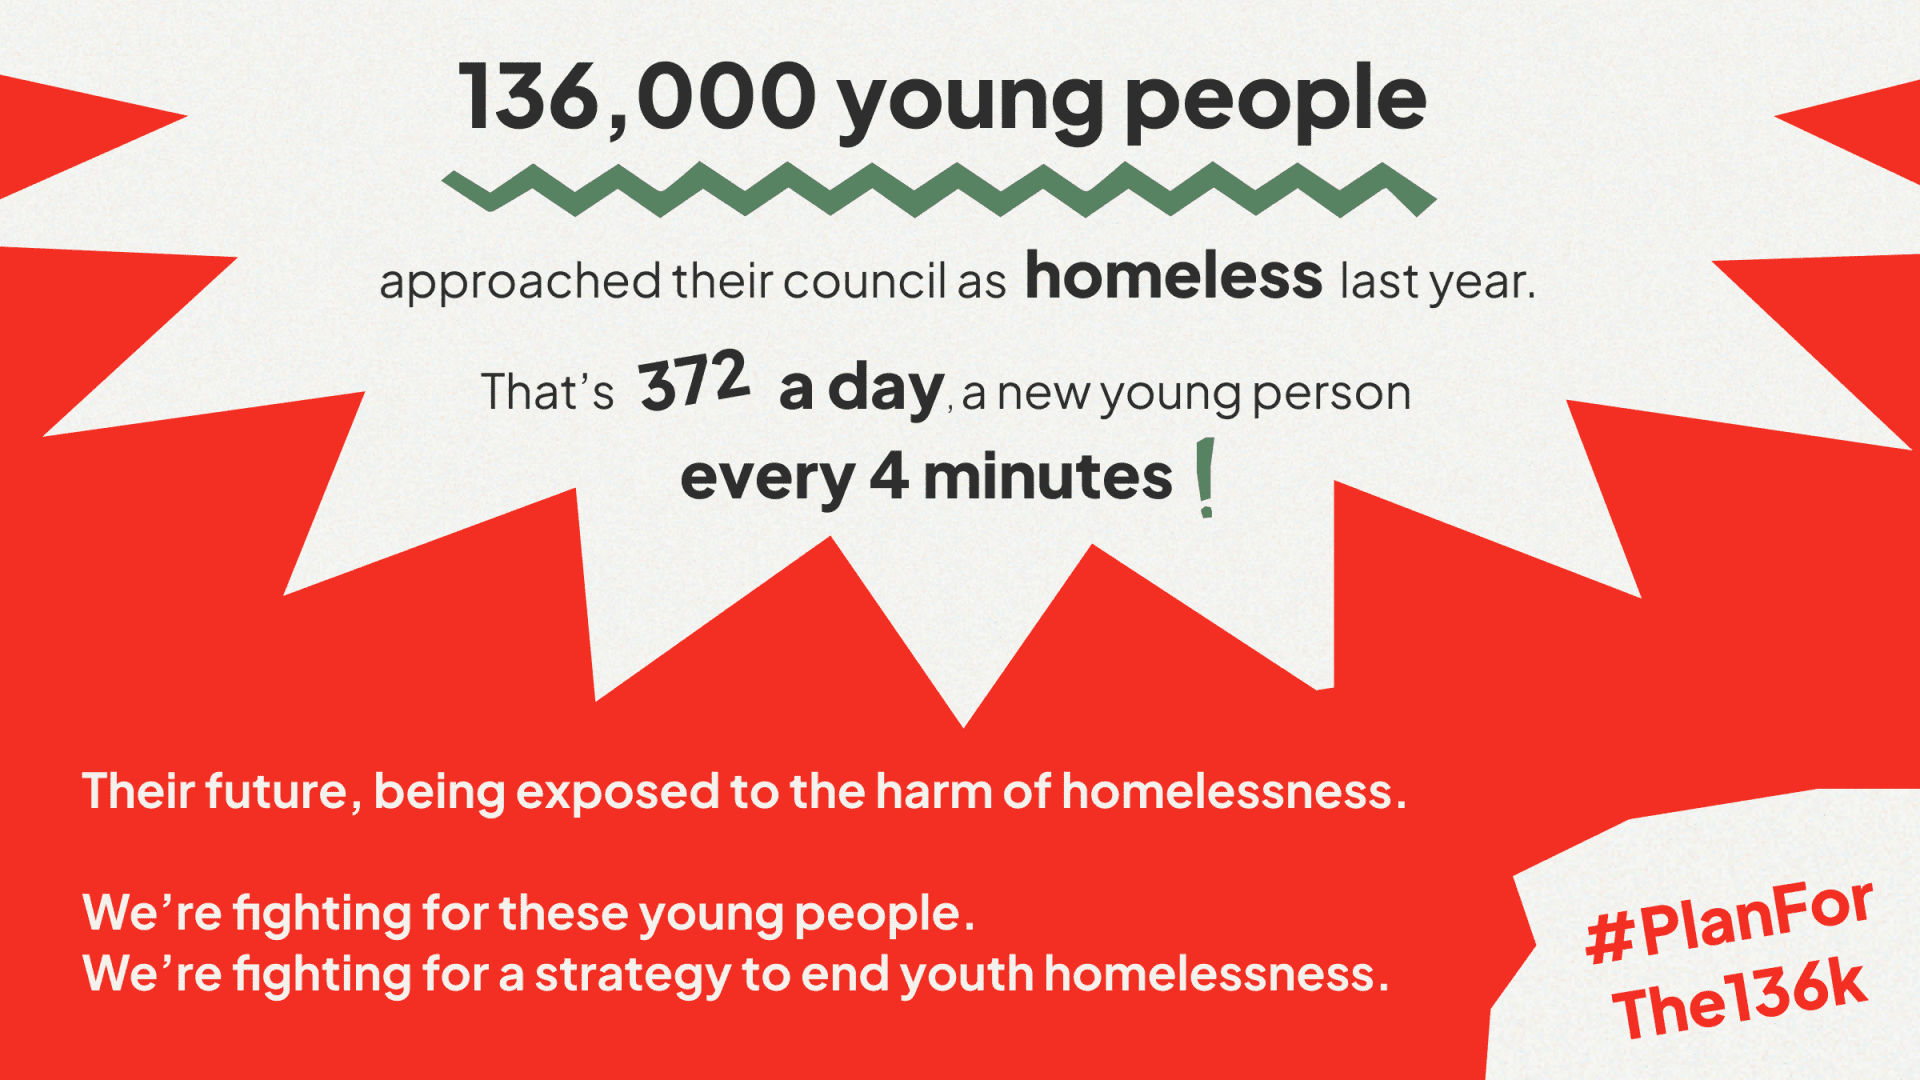 136,000 young people approached their council as homeless last year.